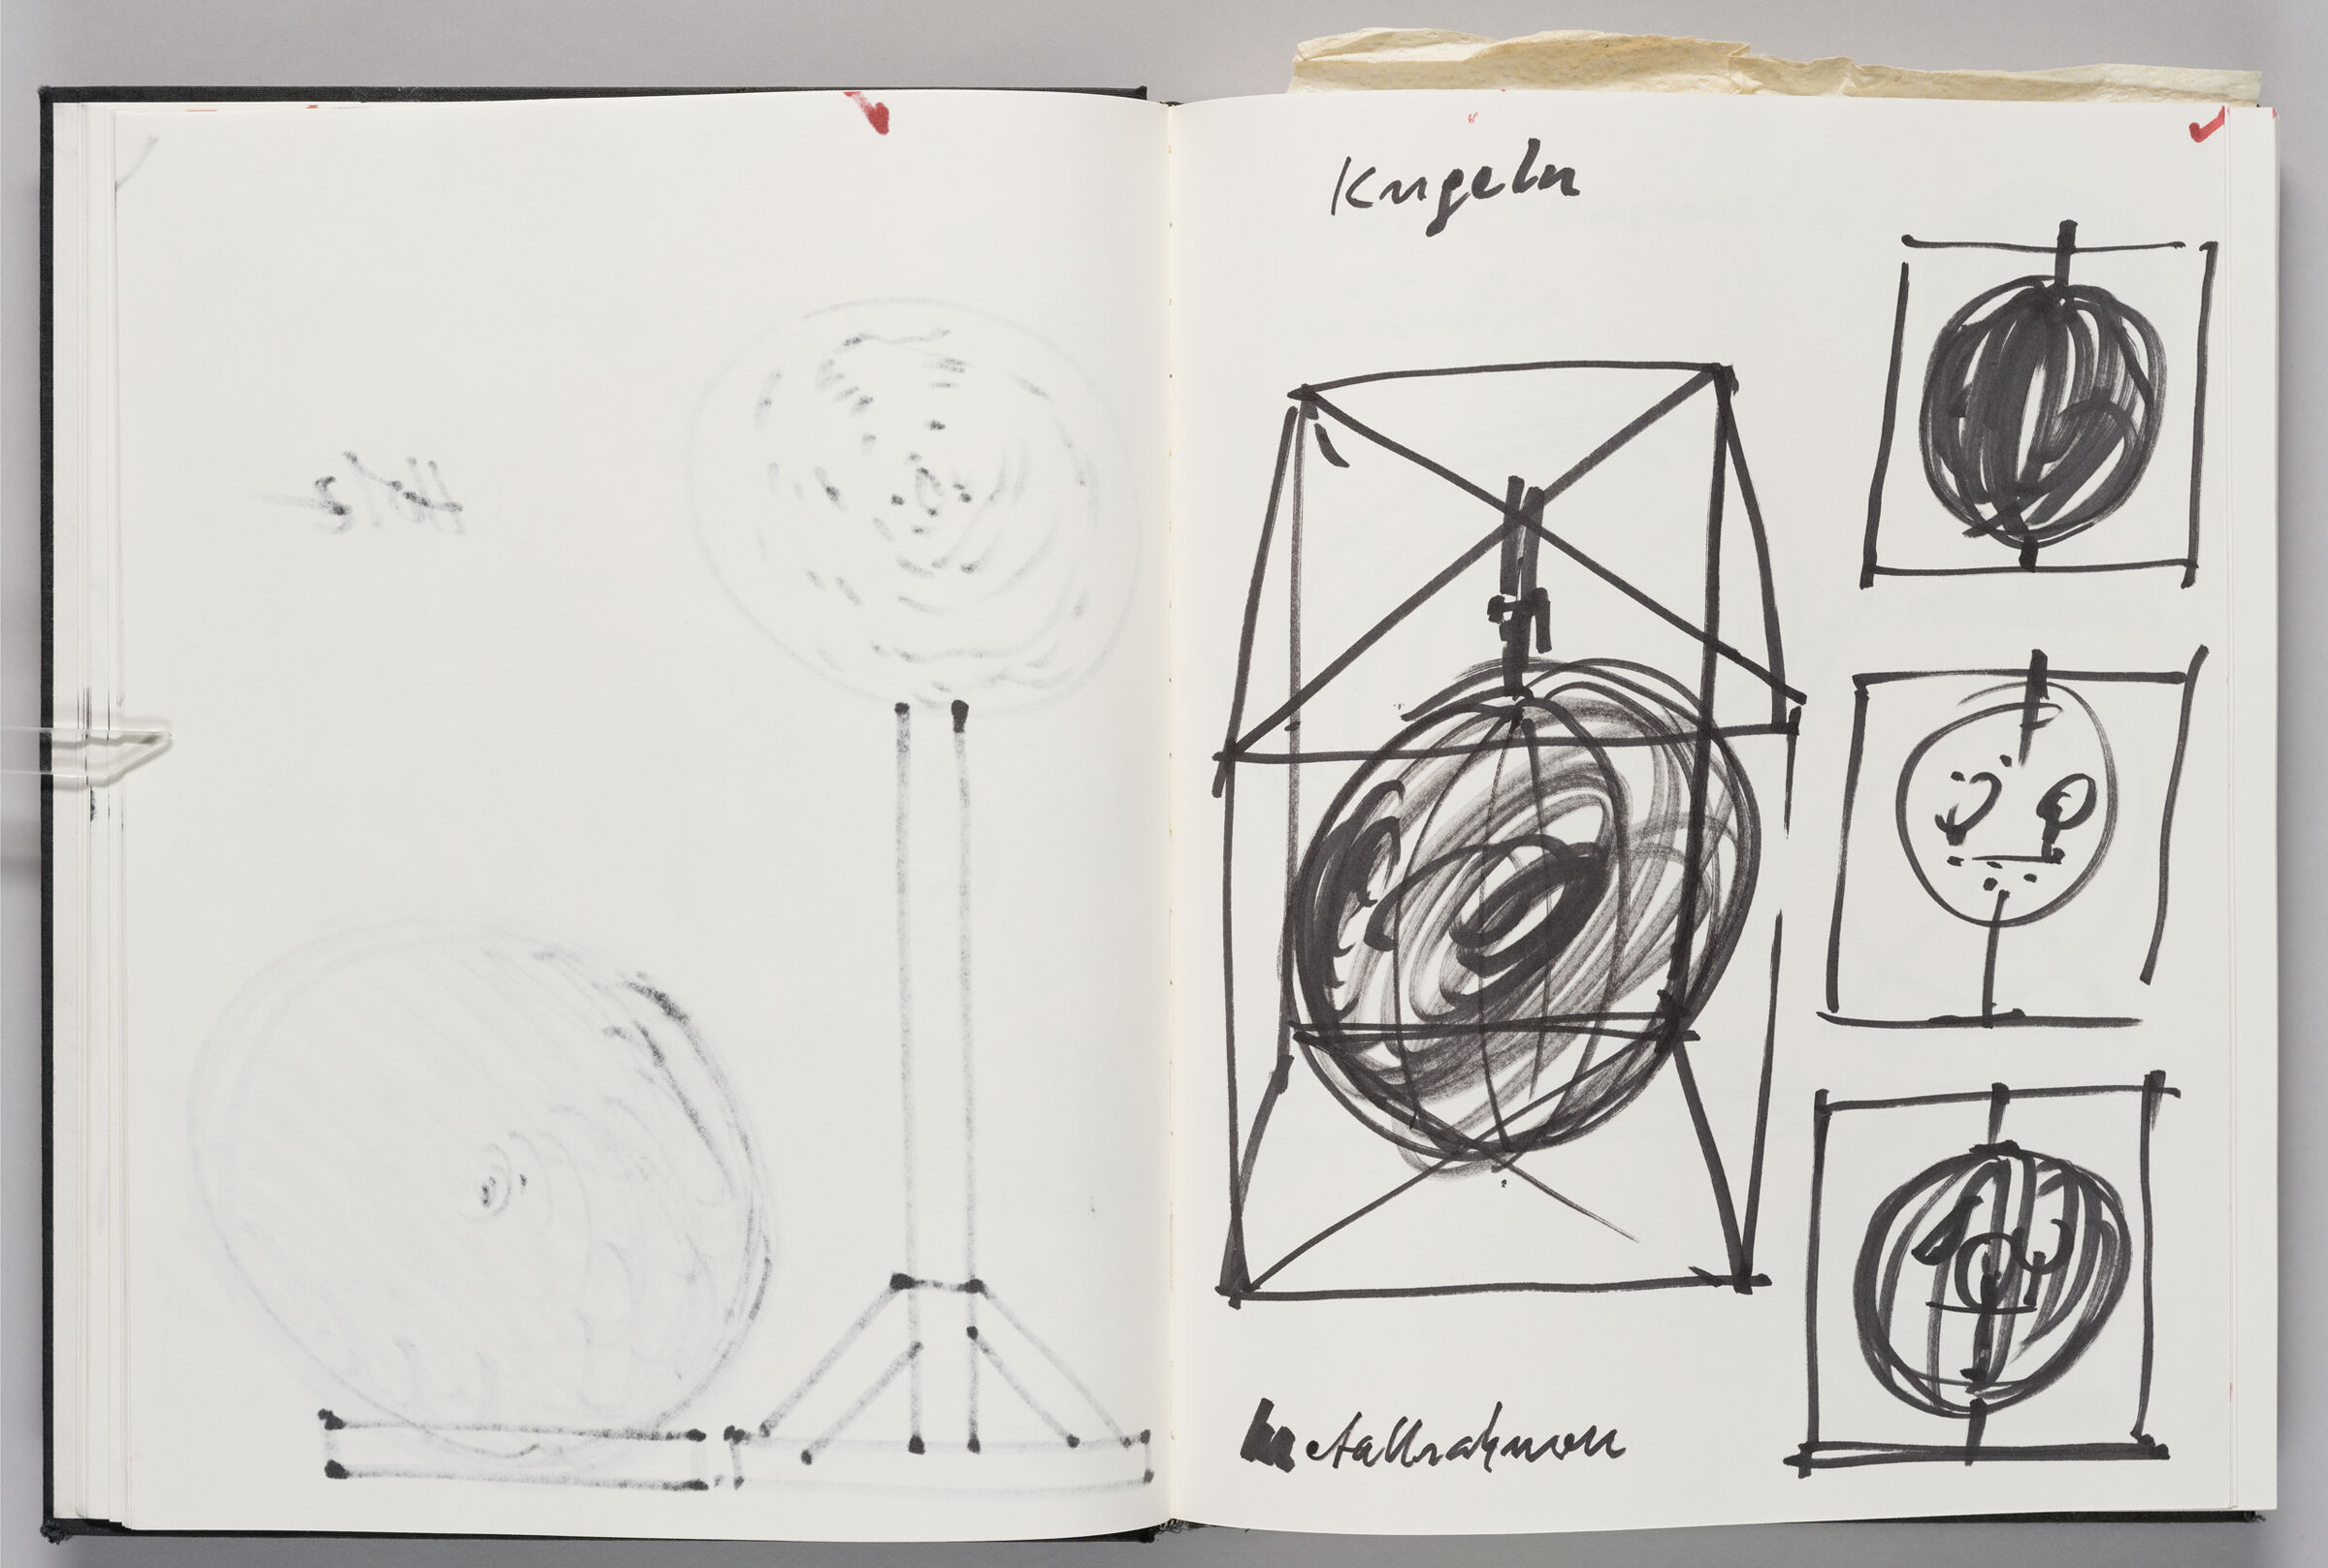 Untitled (Bleed-Through Of Previous Page, Left Page); Untitled (Sketches For Light Sculptures, Right Page)